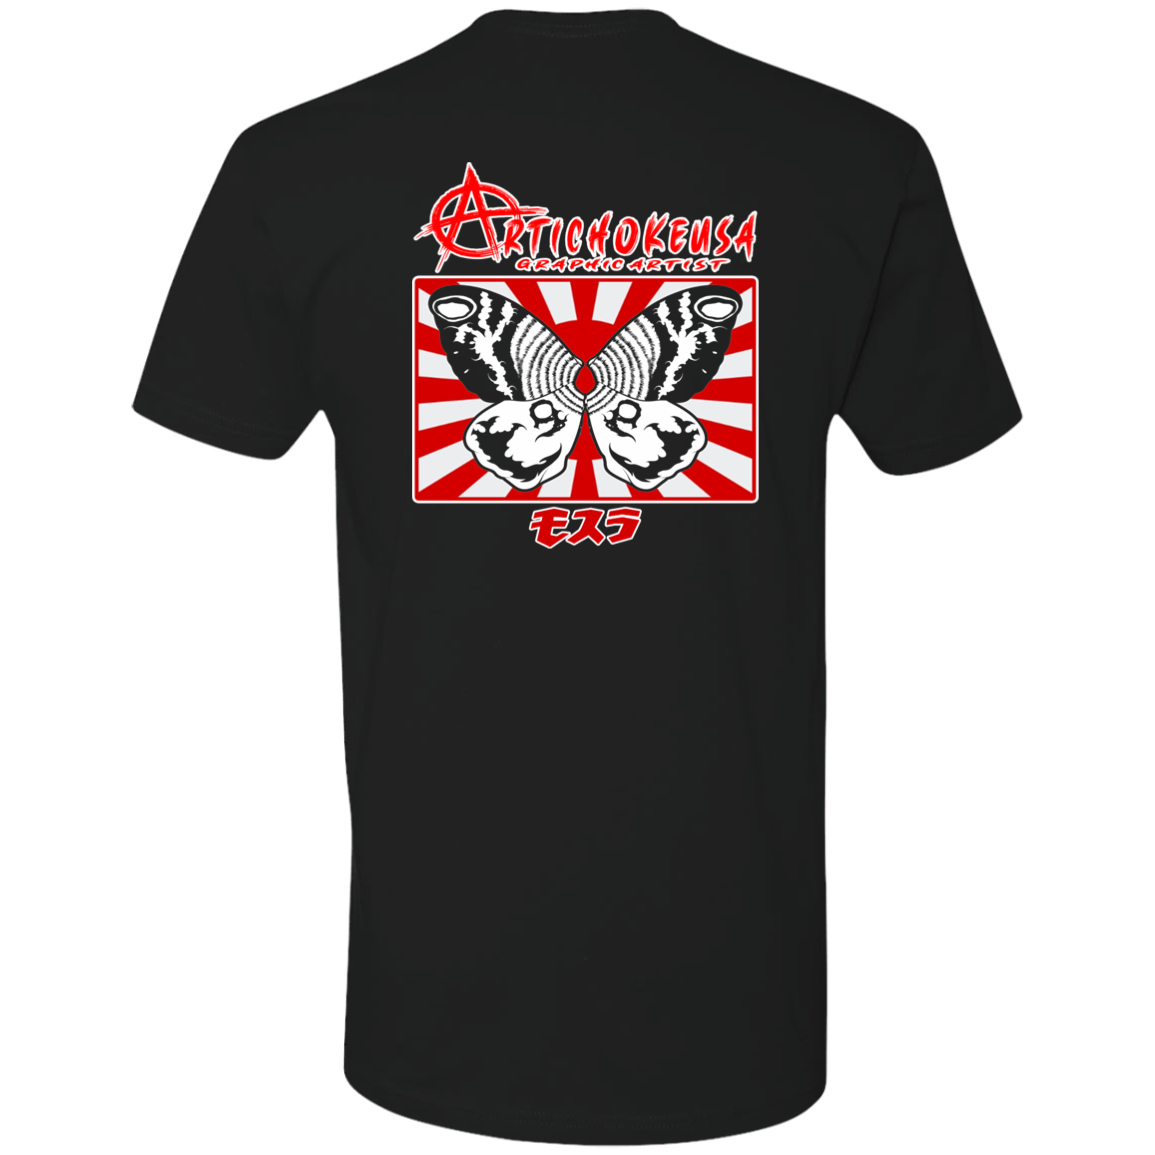 ArtichokeUSA Character and Font design. Shobijin (Twins)/Mothra Fan Art . Let's Create Your Own Design Today. Ultra Soft 100% Combed Cotton T-Shirt